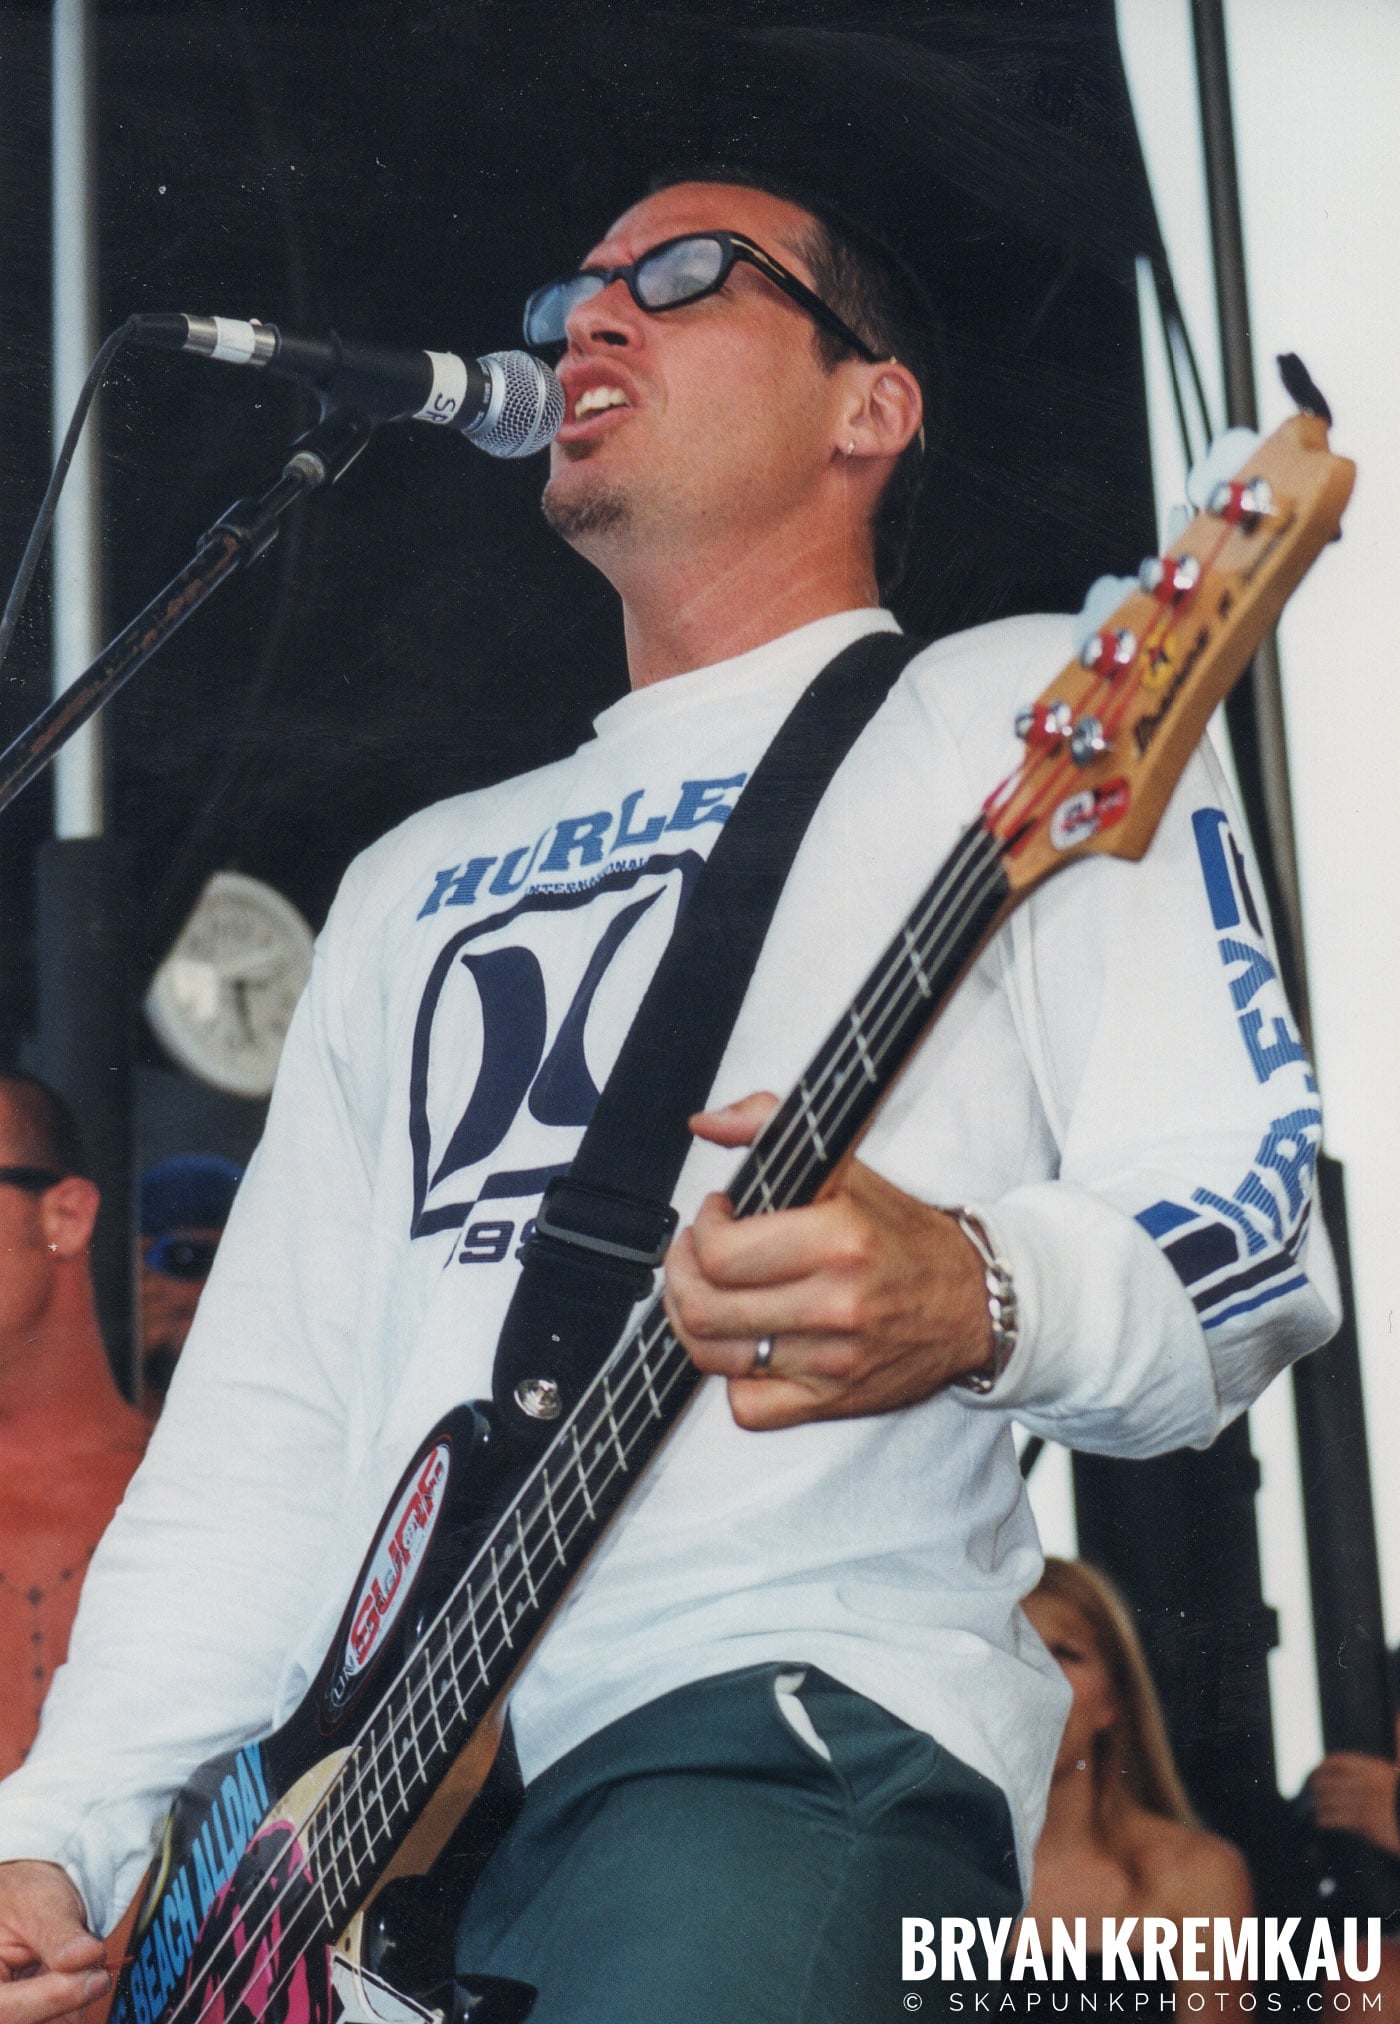 Pennywise @ Vans Warped Tour, Randall's Island, NYC - 7.16.99 (1)